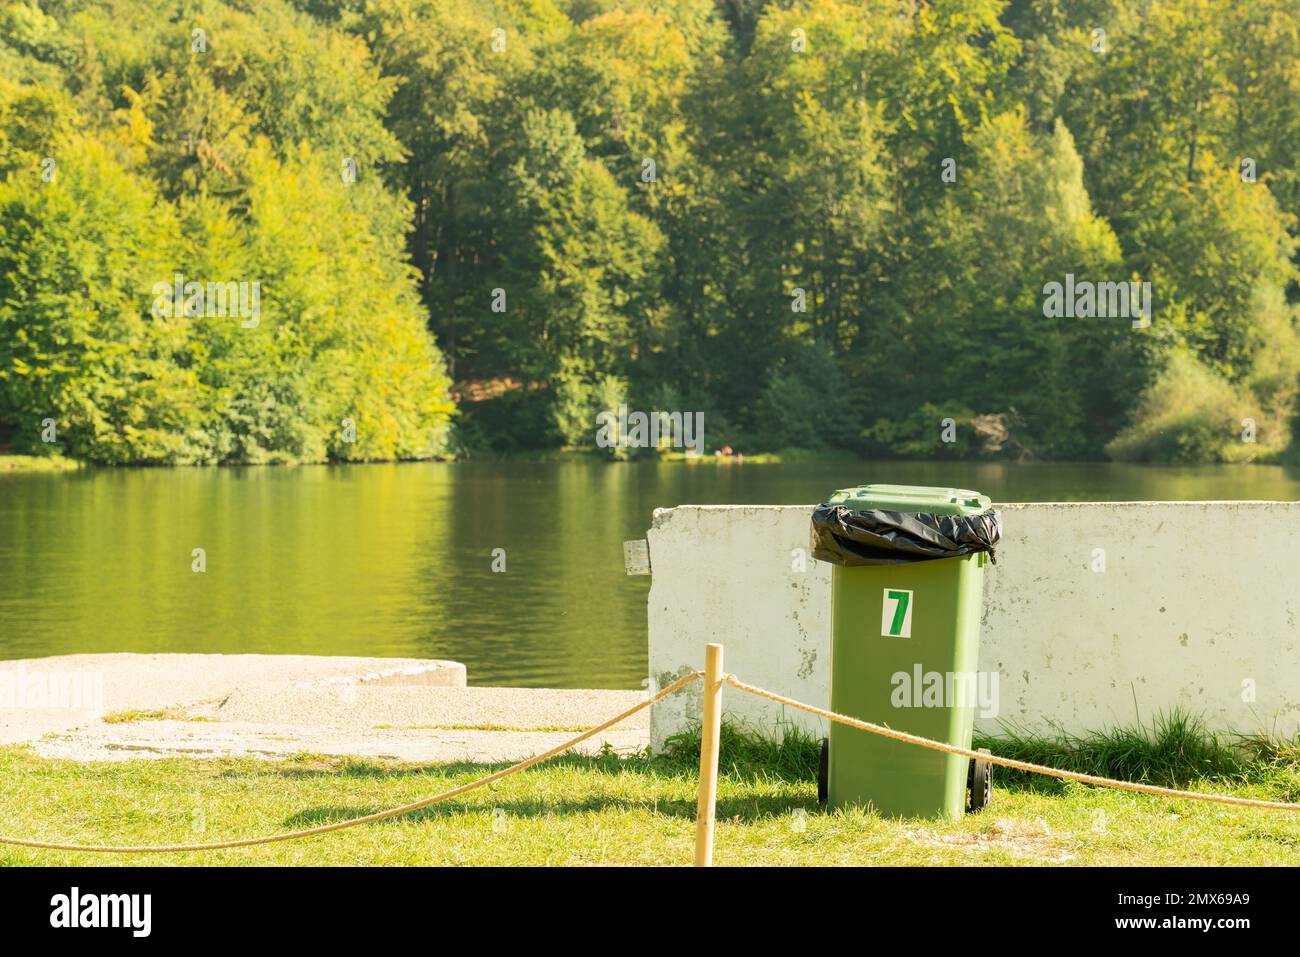 Landscape of green summer lake and forest with recycle bin as recycling environment sustainable dumpster bin concept Stock Photo